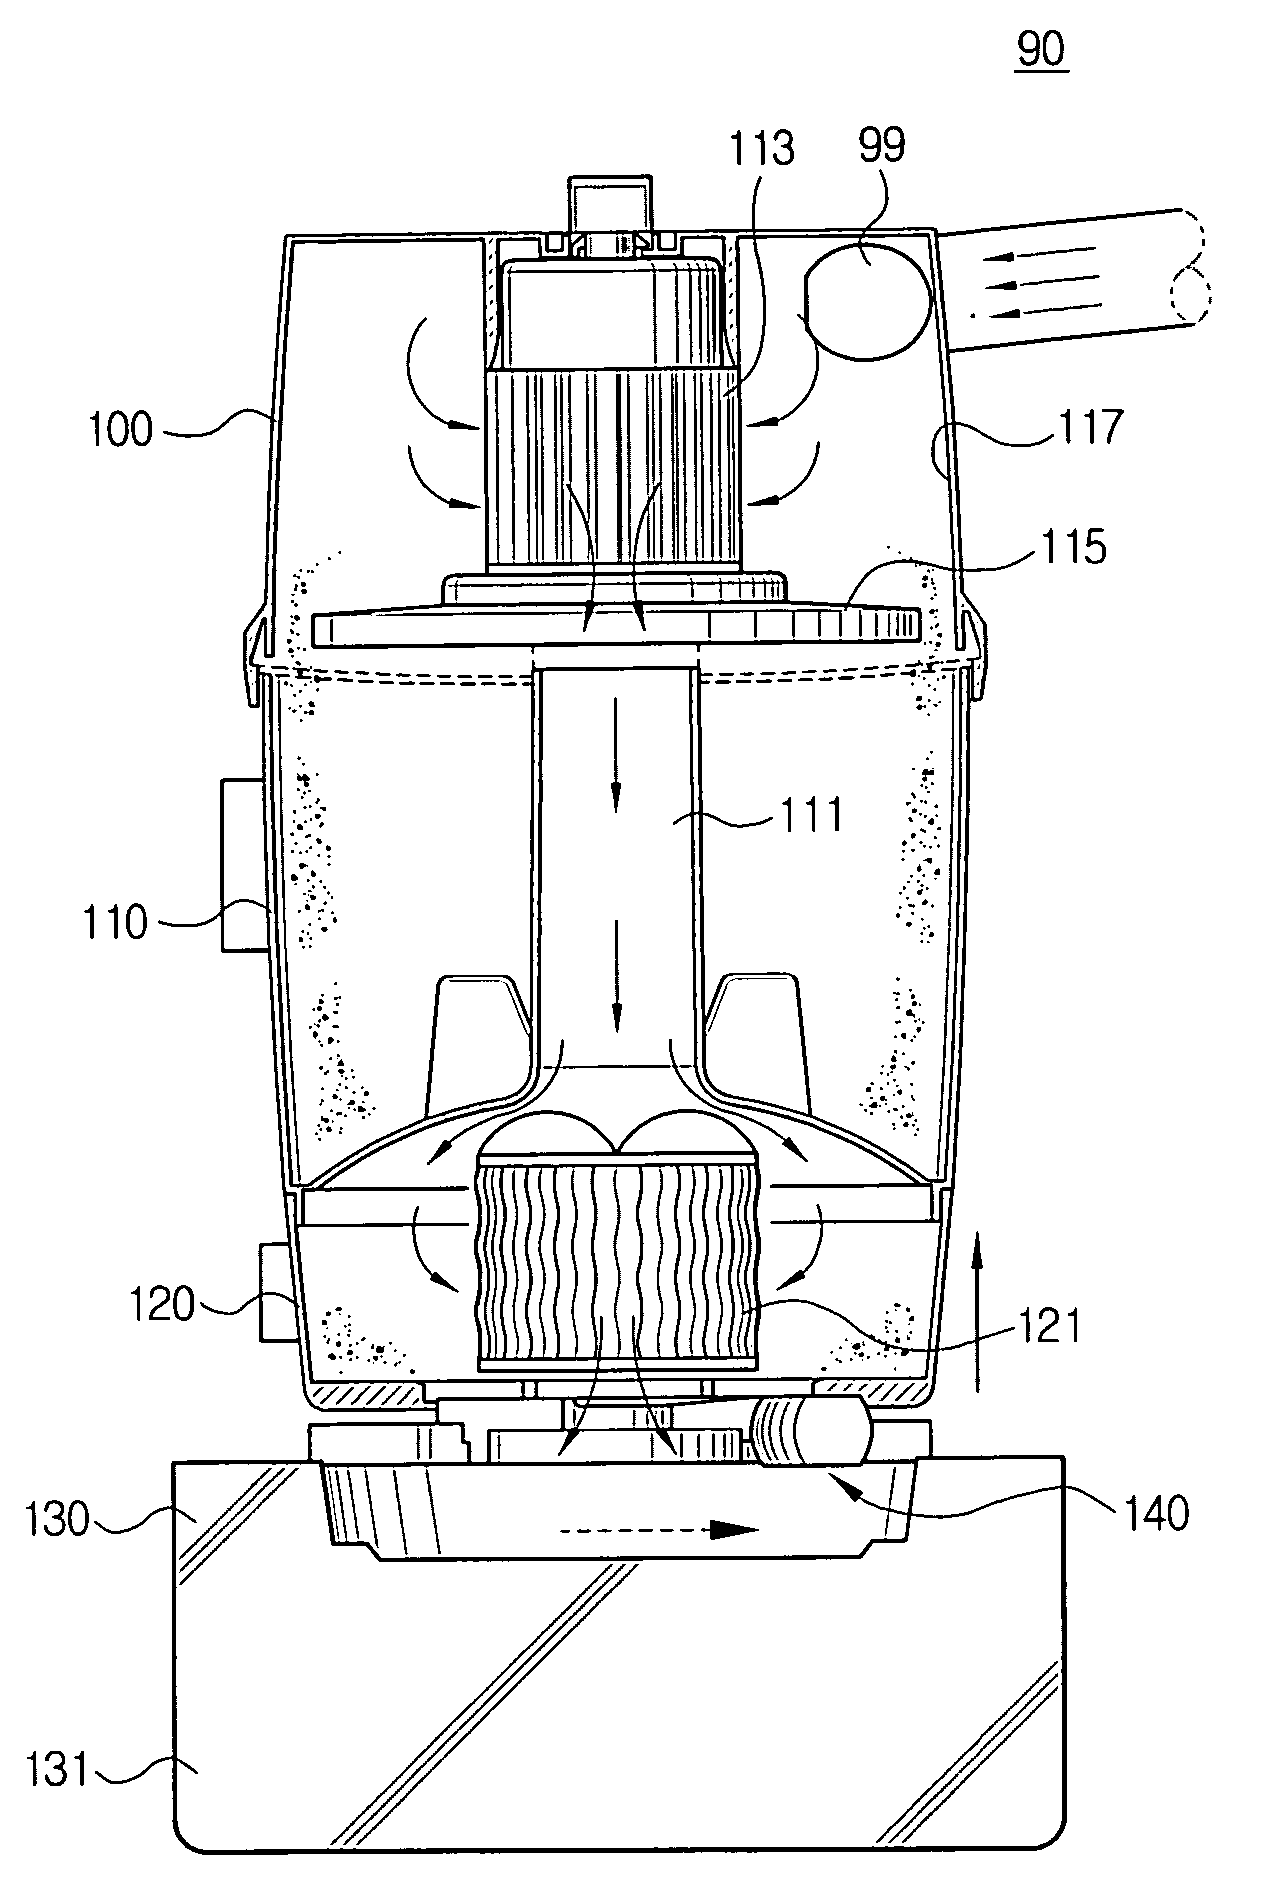 Attaching and detaching device for contaminant collecting receptacle of cyclone separator